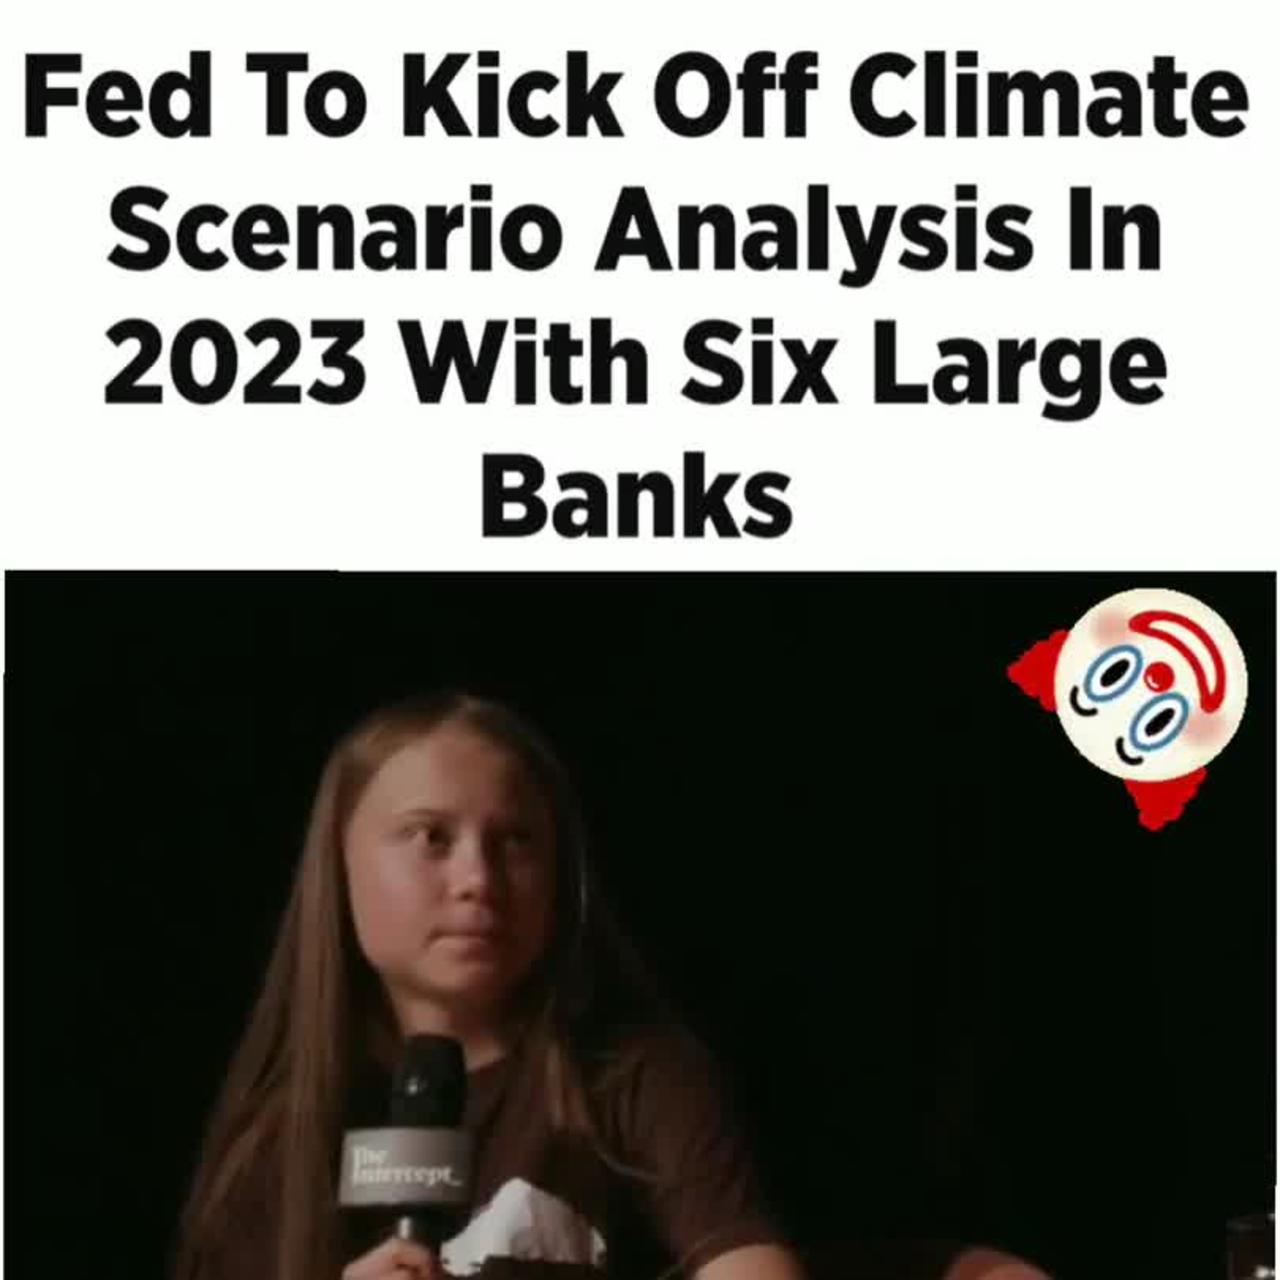 Fed To Kick Off Climate Scenario Analysis In 2023 With Six Large Banks